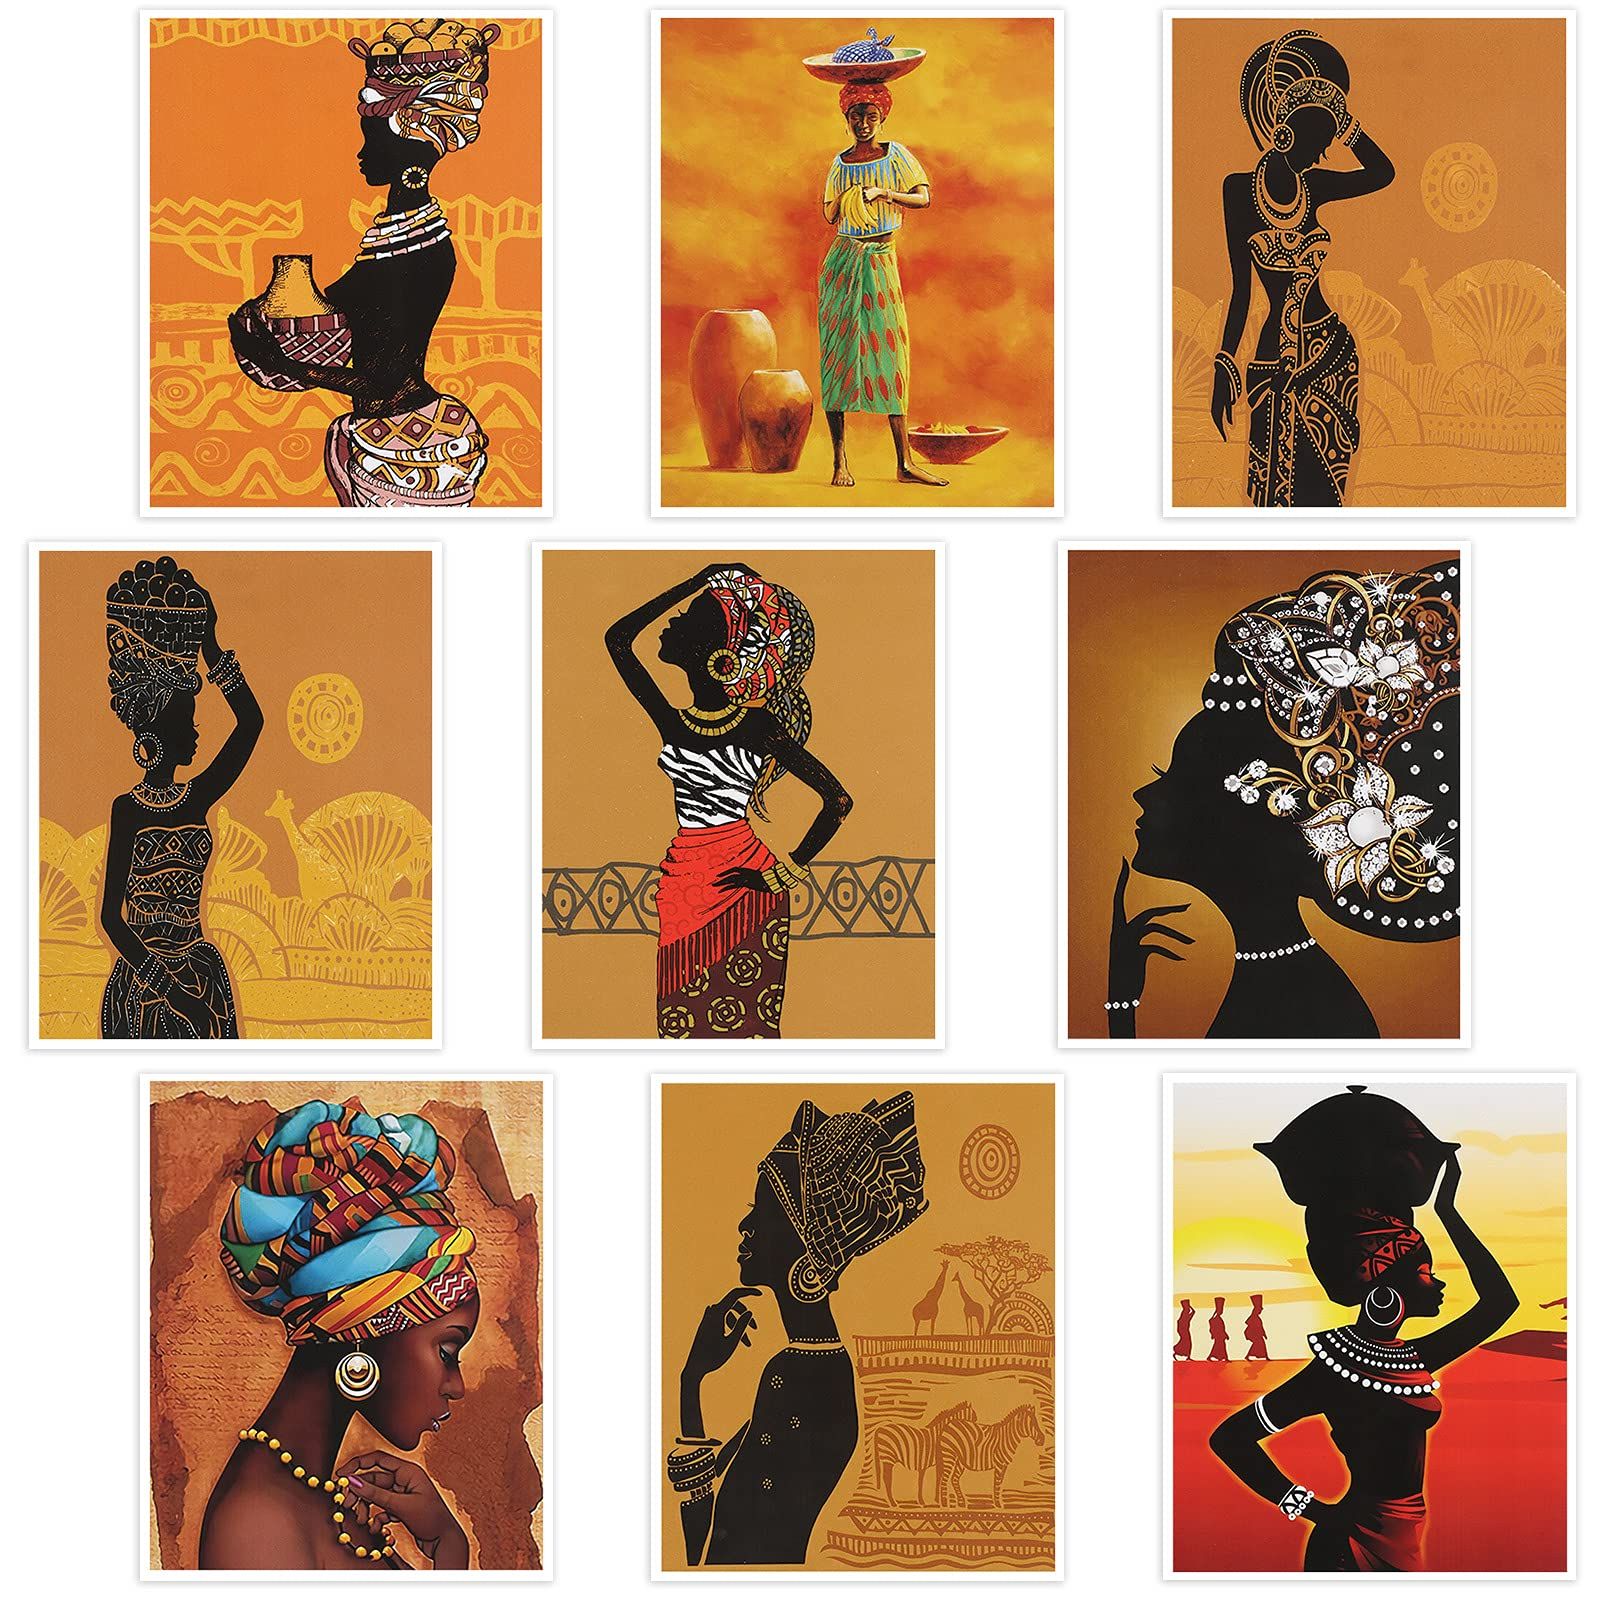 Popular Amazon: 9 Pieces African American Wall Art Painting Retro Style Black  Woman Ethnic Ancient Theme Diamond Girl Room Poster Black Art Painting  Bedroom Bathroom Decor Unframed, 8 X 10 Inch: Posters & Prints Inside Retro Art Wall Art (View 14 of 15)